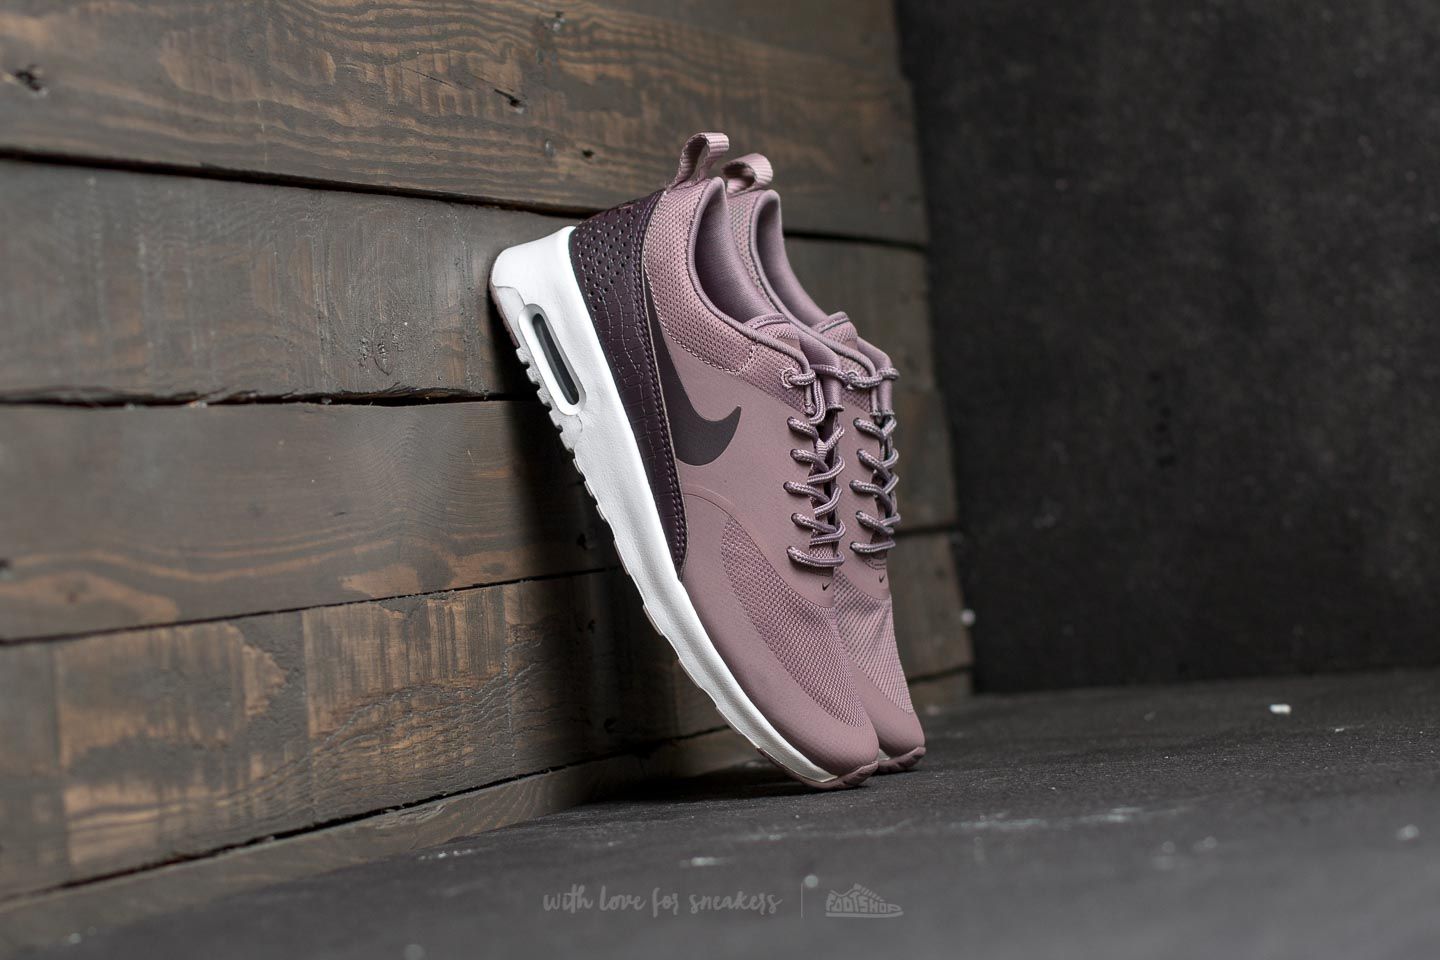 Chaussures et baskets femme Nike Wmns Air Max Thea Taupe Grey/ Port Wine-White